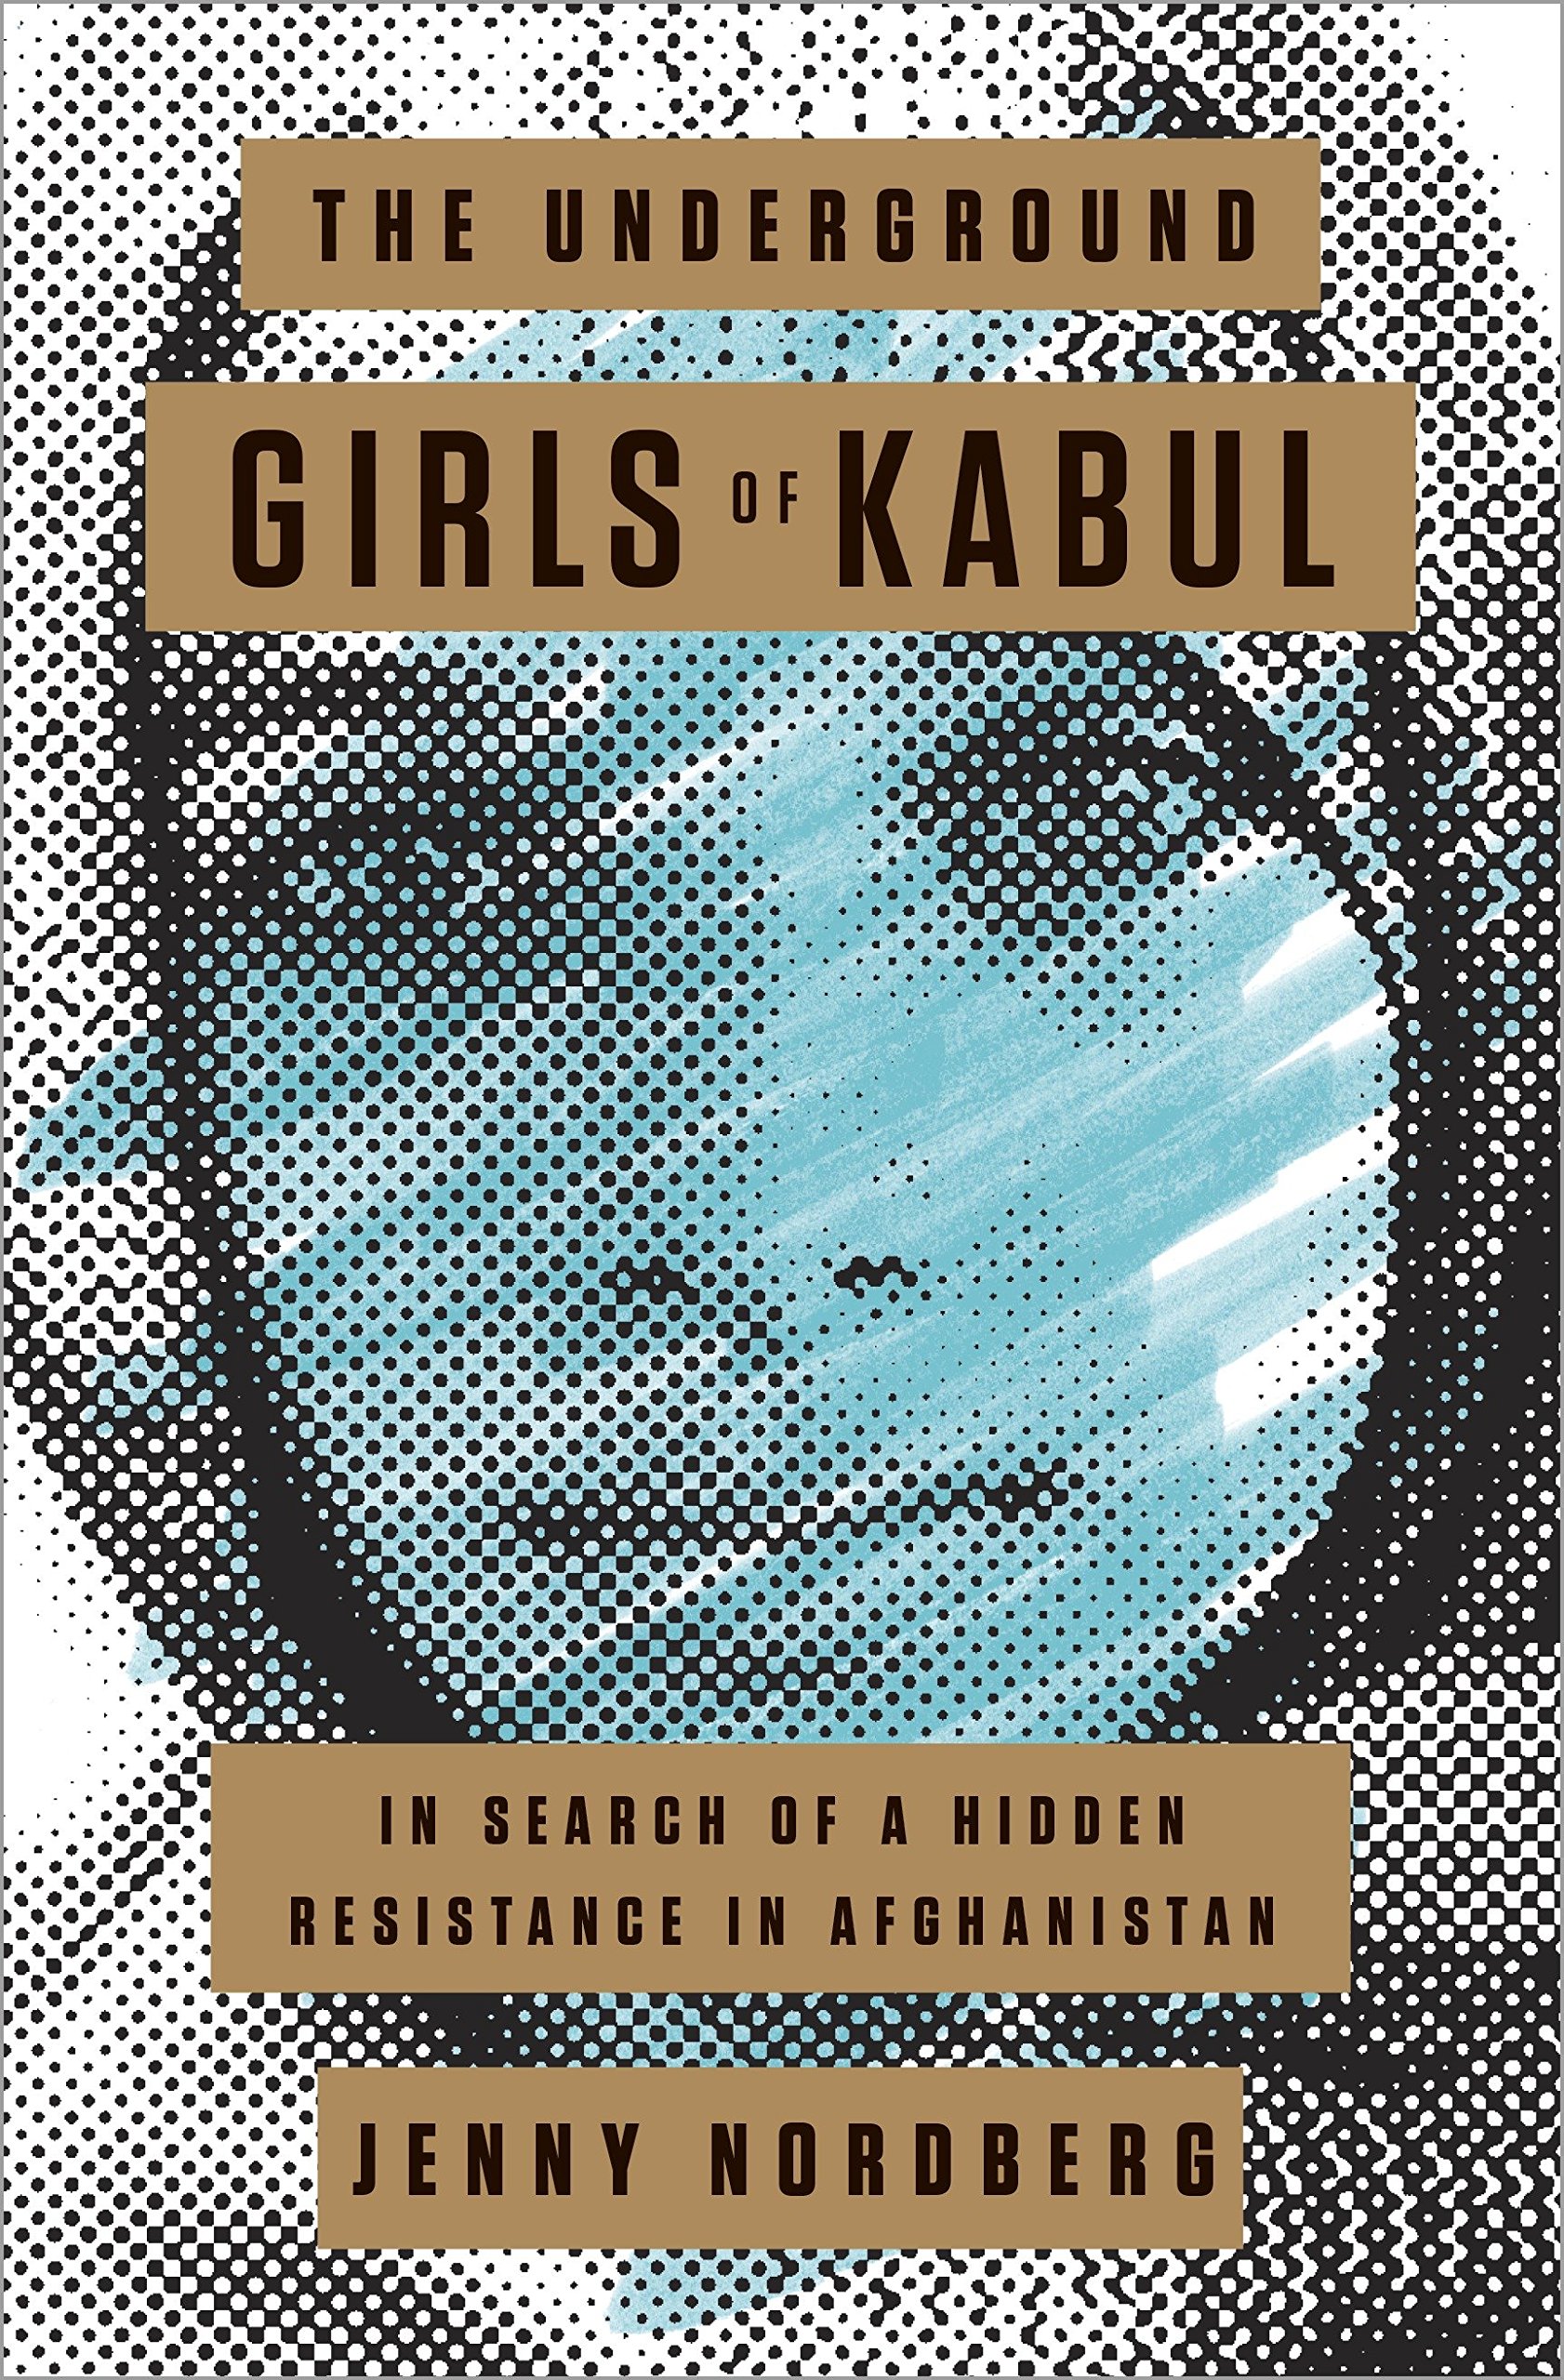 The Underground Girls of Kabul: In Search of a Hidden Resistance in Afghanistan